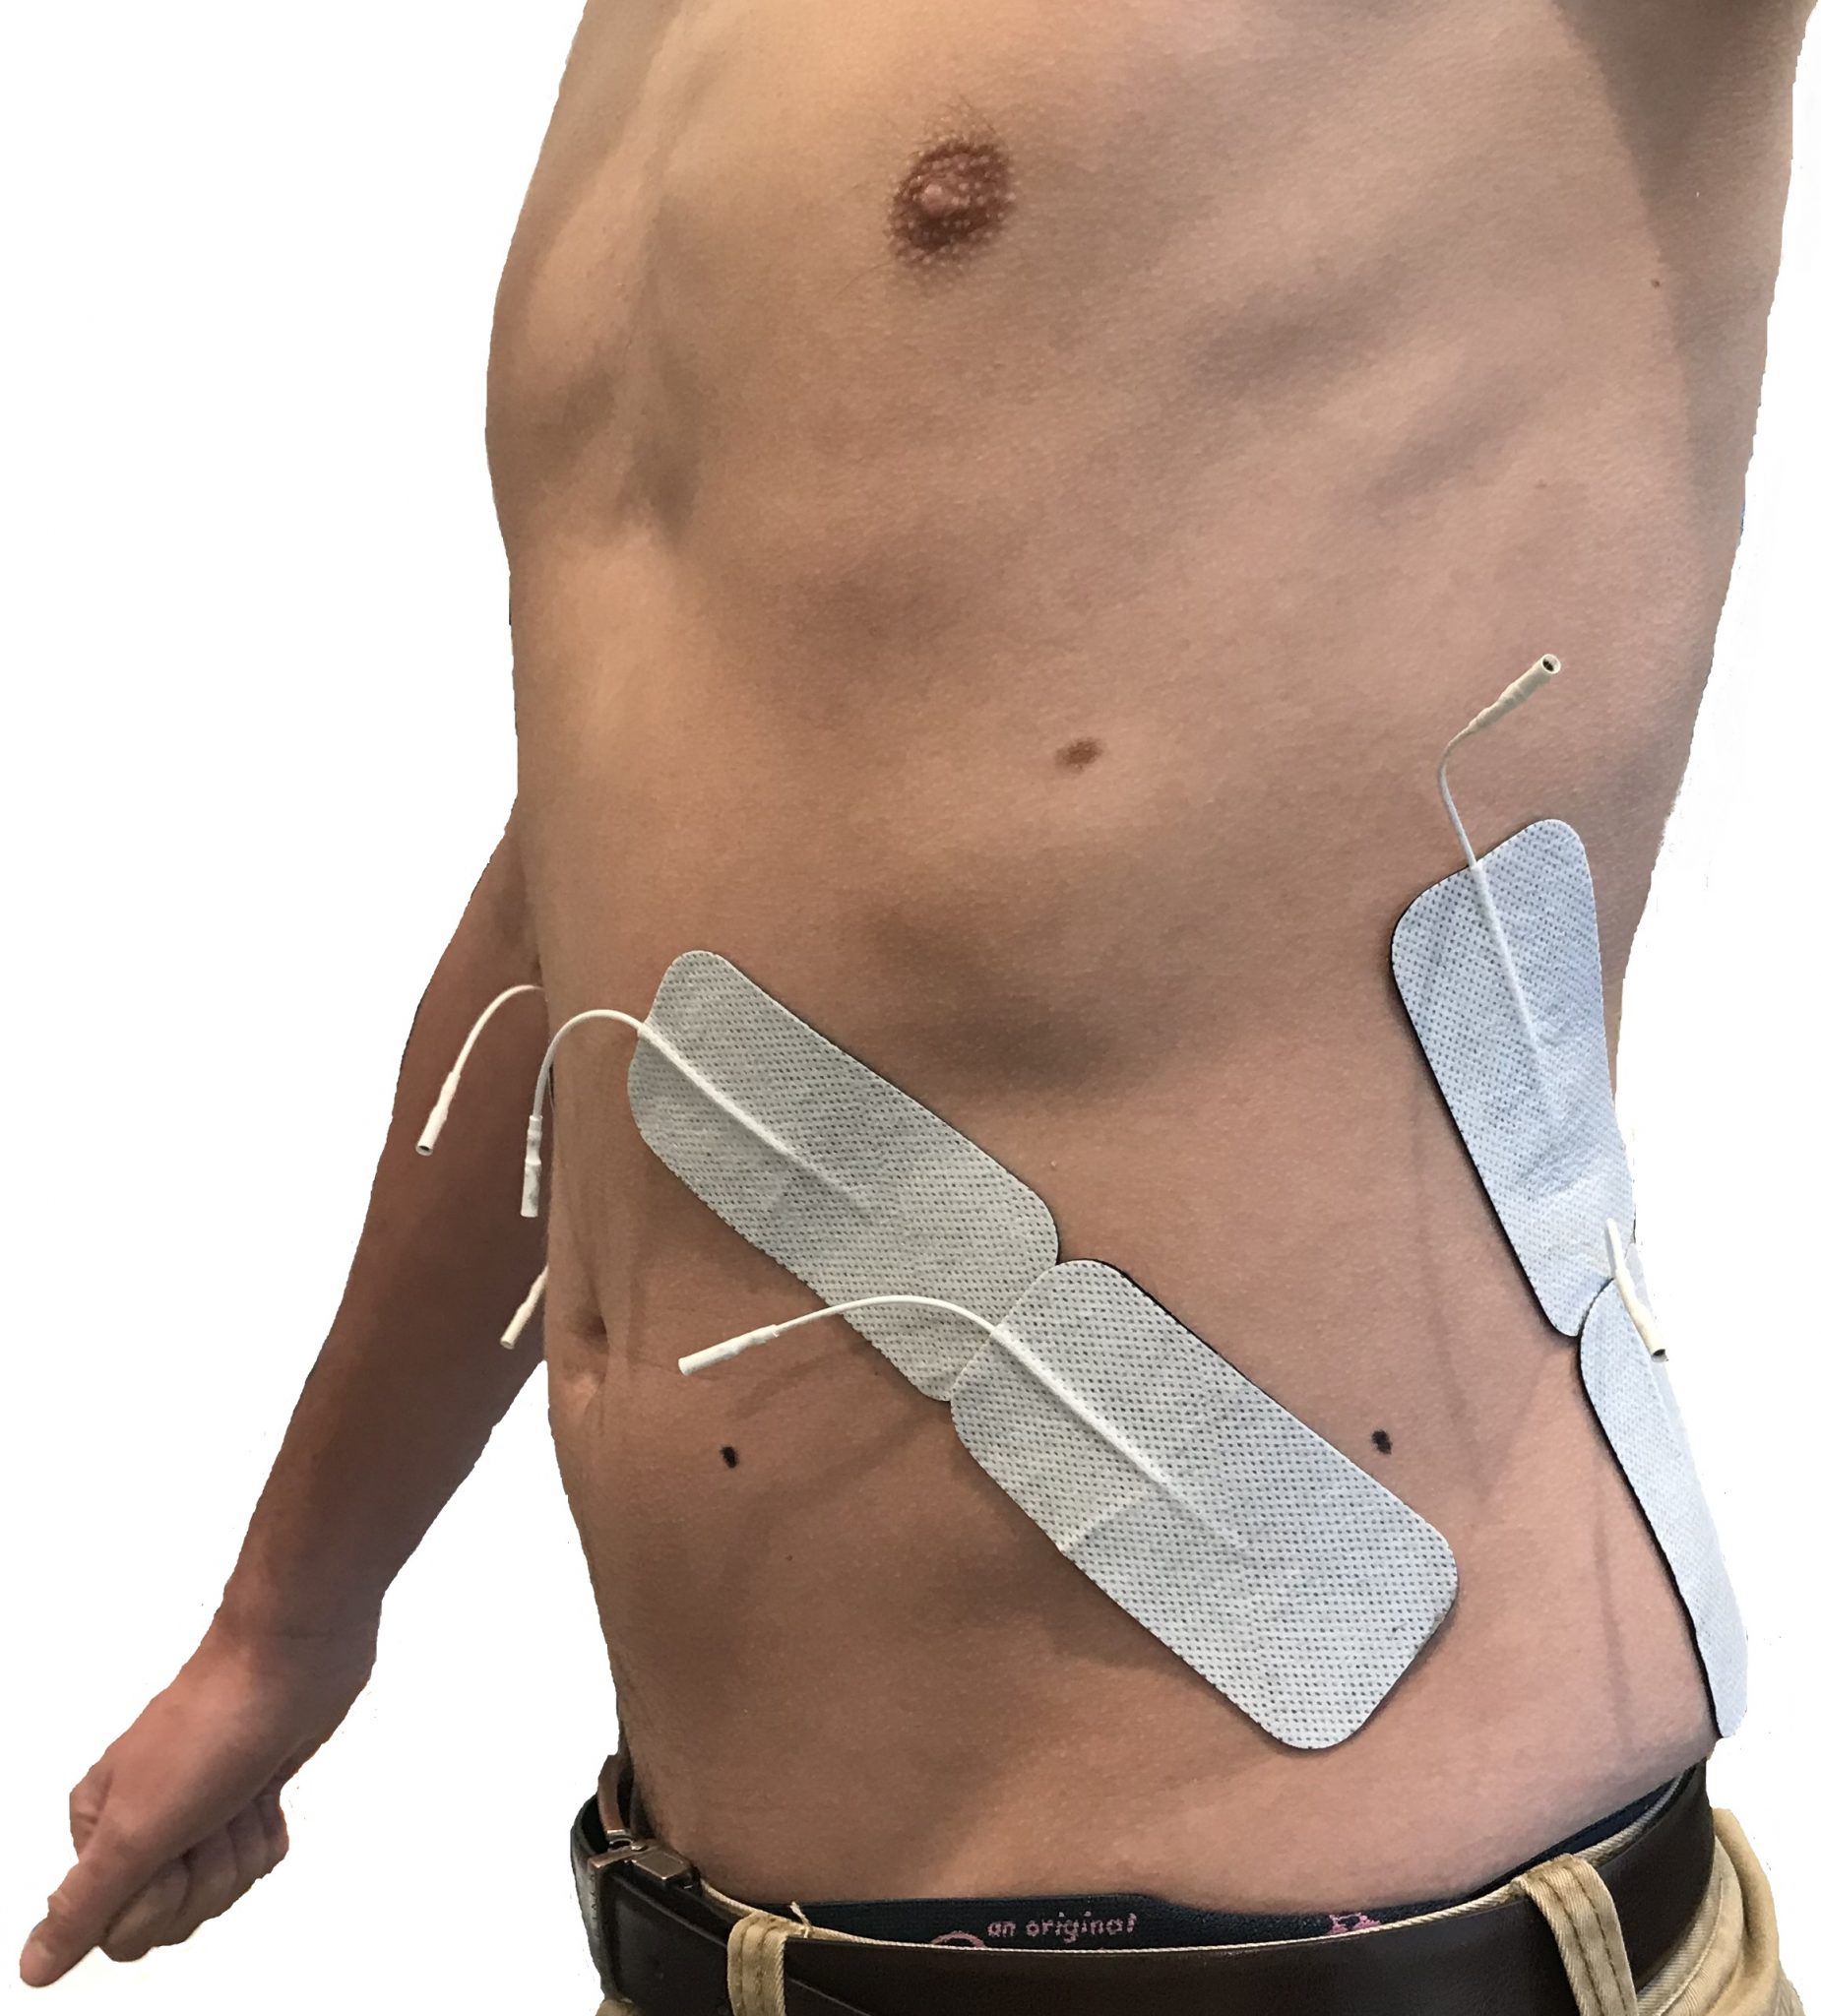 Electrical stimulation of the abdominal muscles for the critically ill -  Motor Impairment